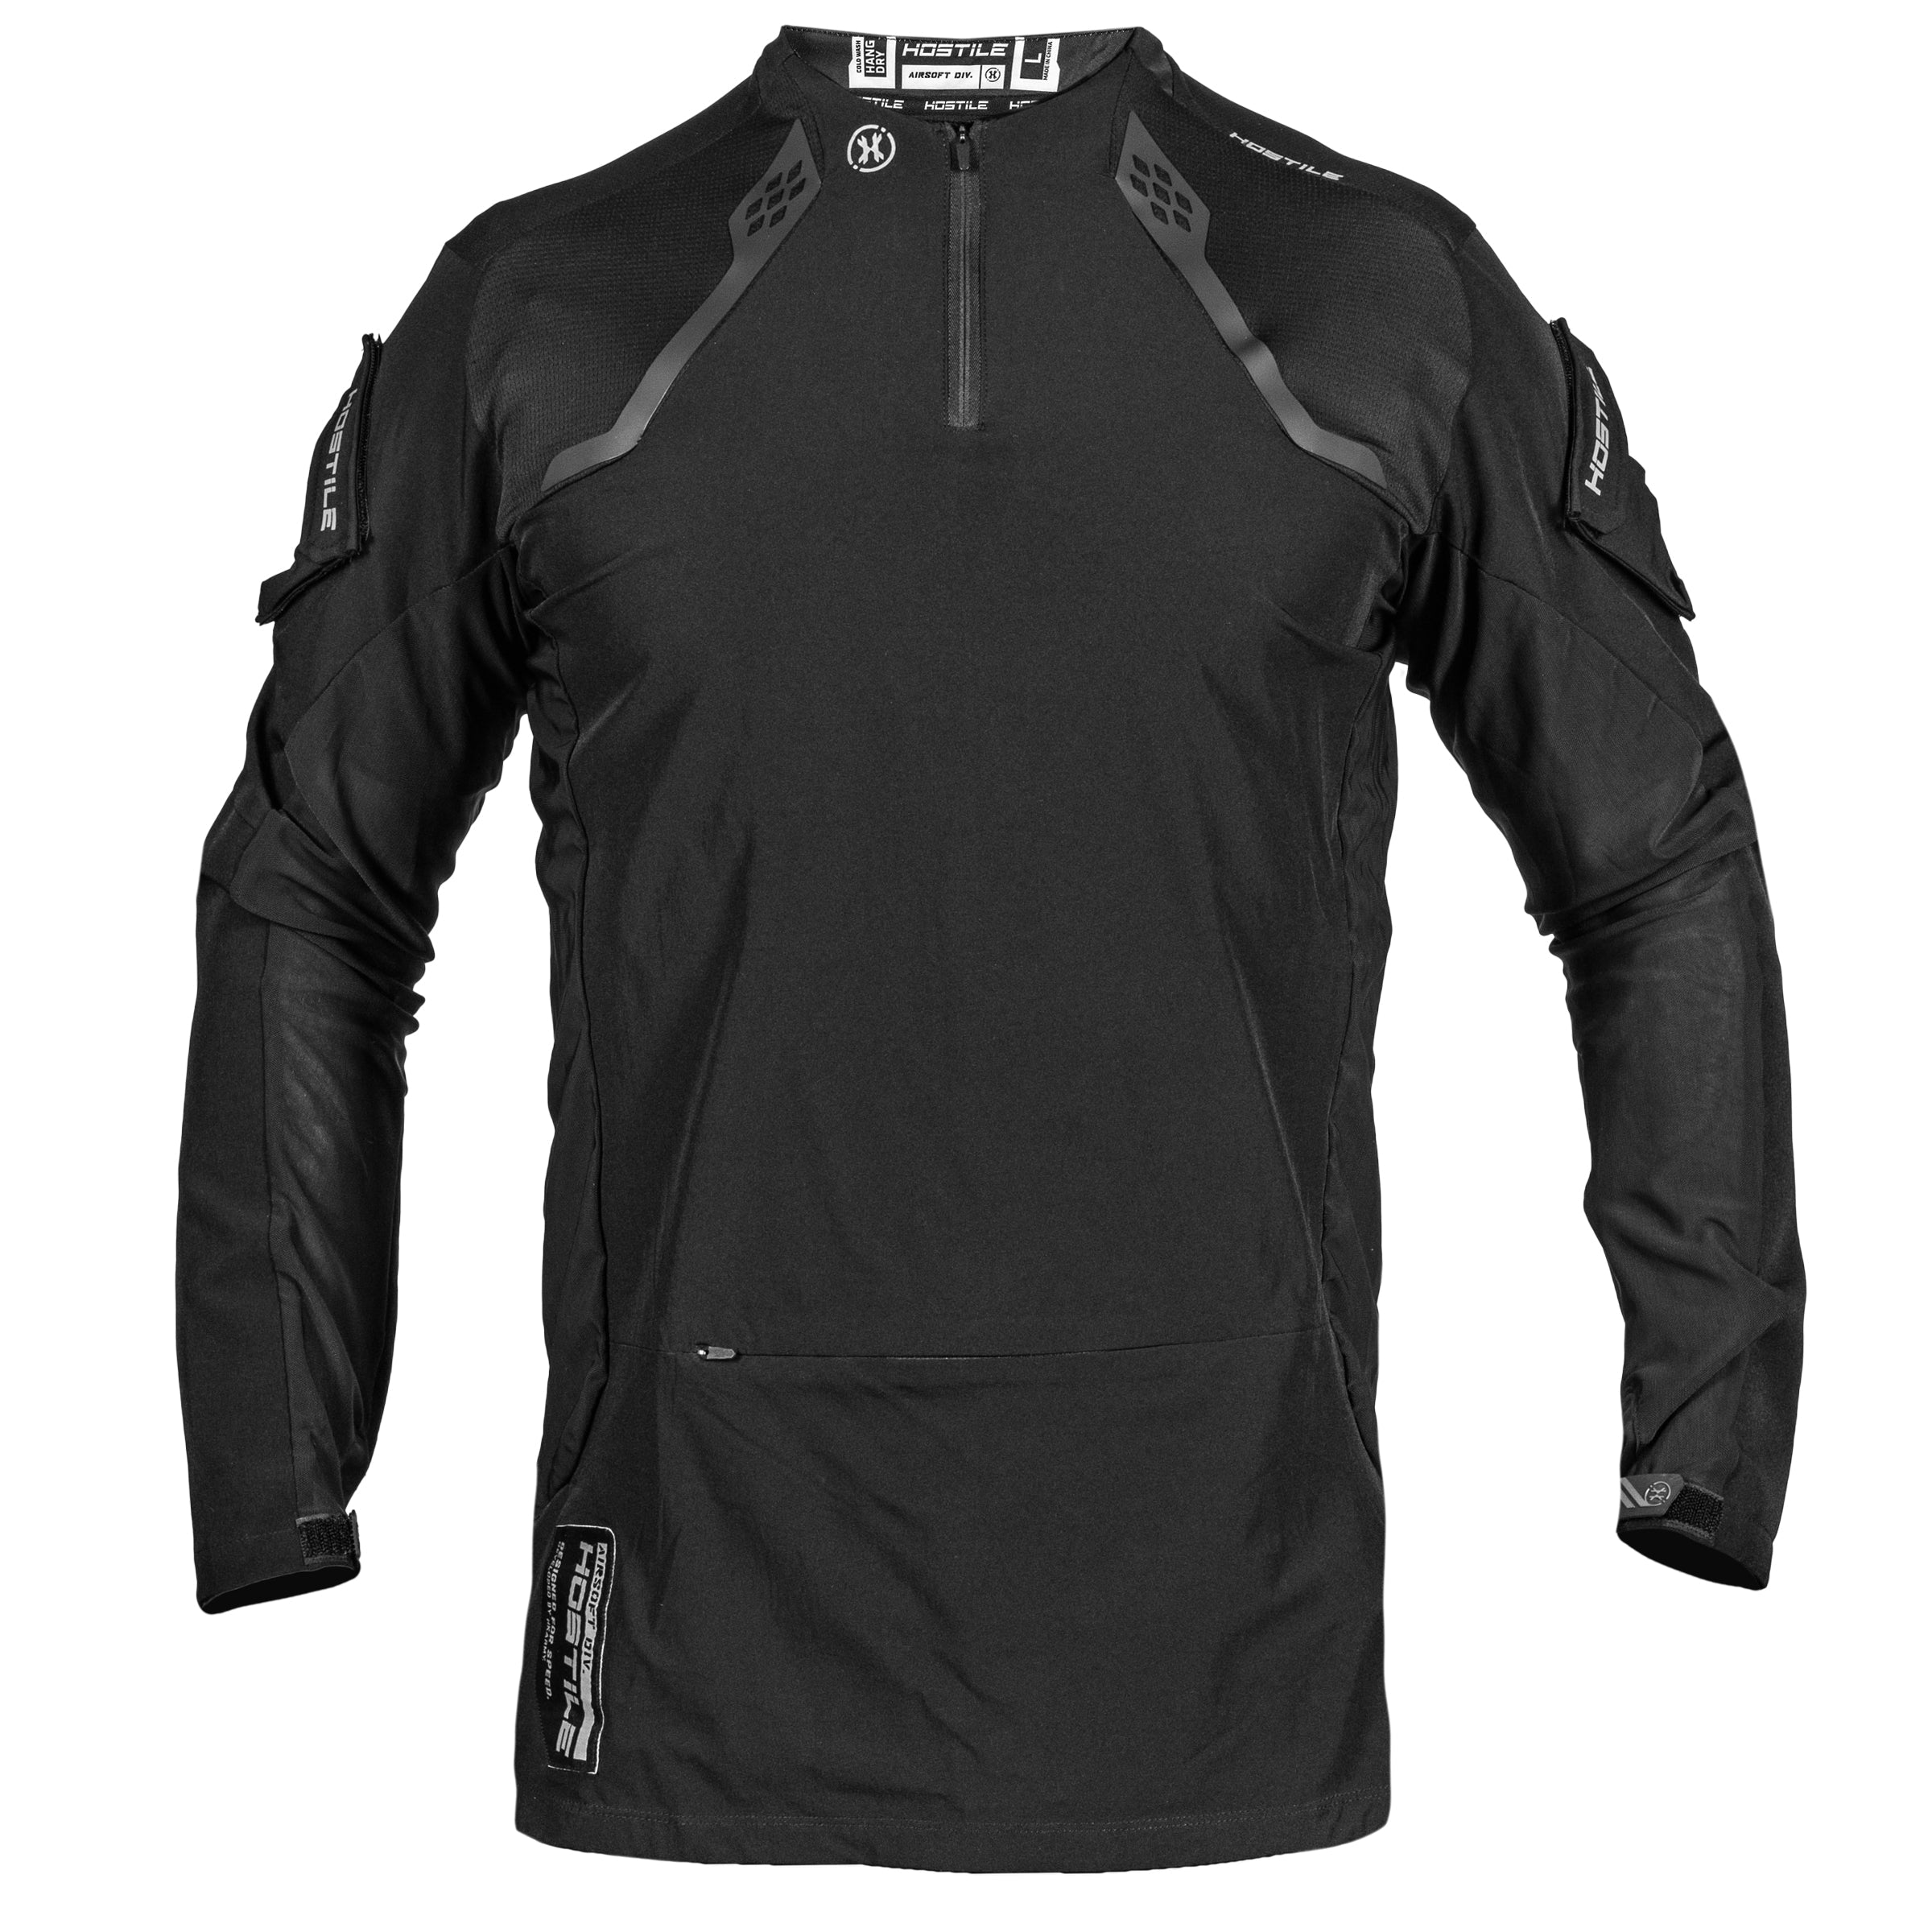 RECON JERSEY - STEALTH - Eminent Paintball And Airsoft